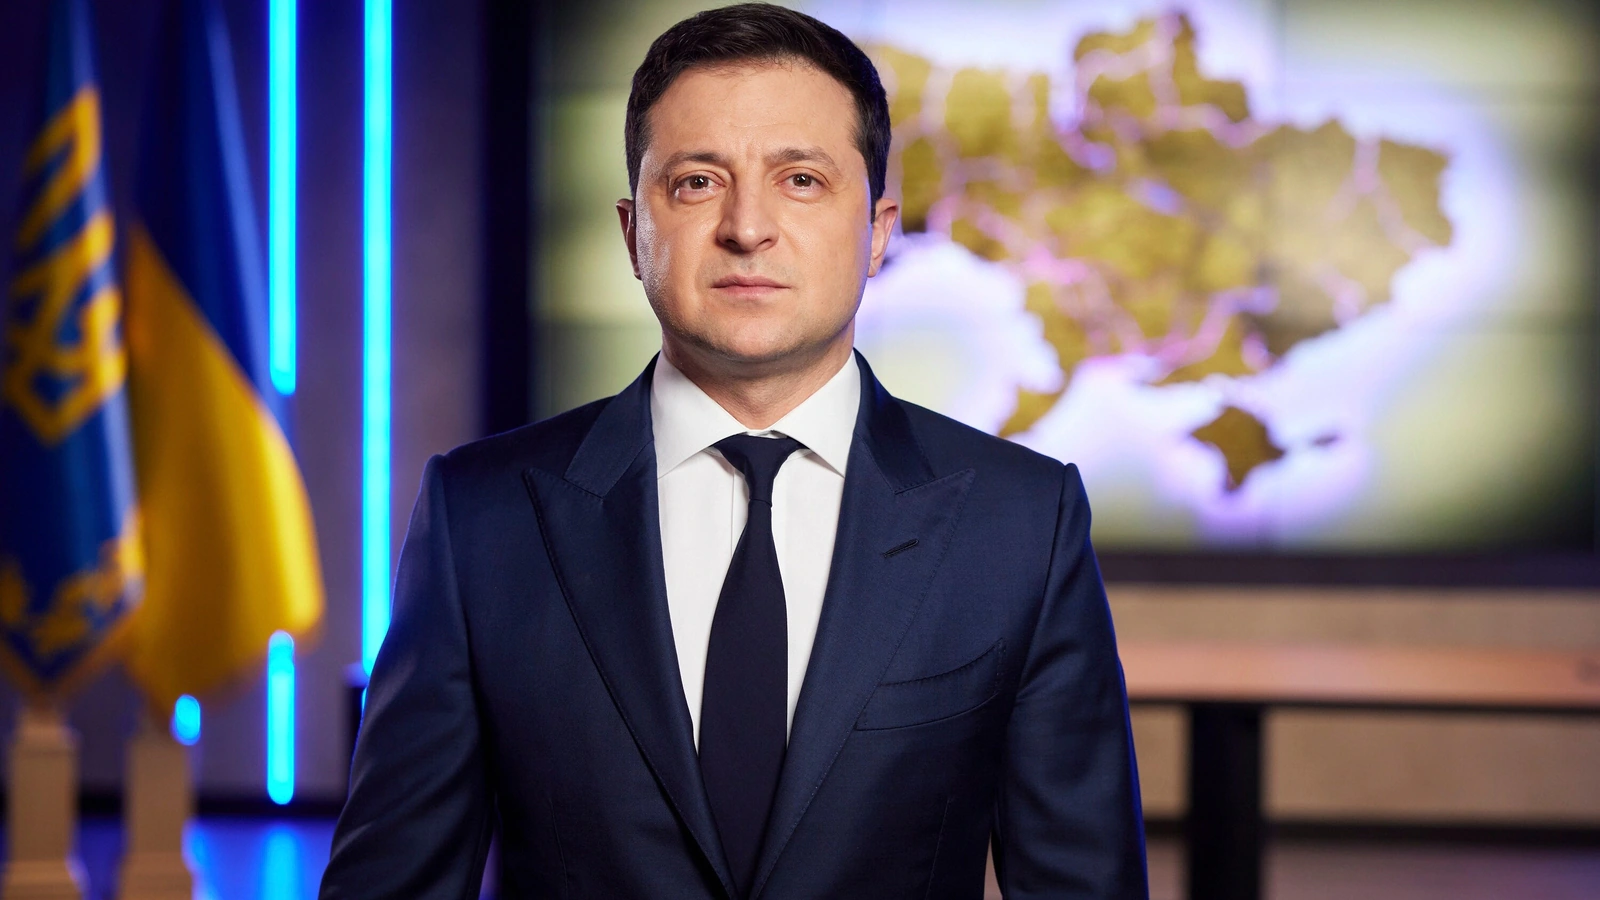 Russia must return to pre-invasion position for agreement – Zelensky